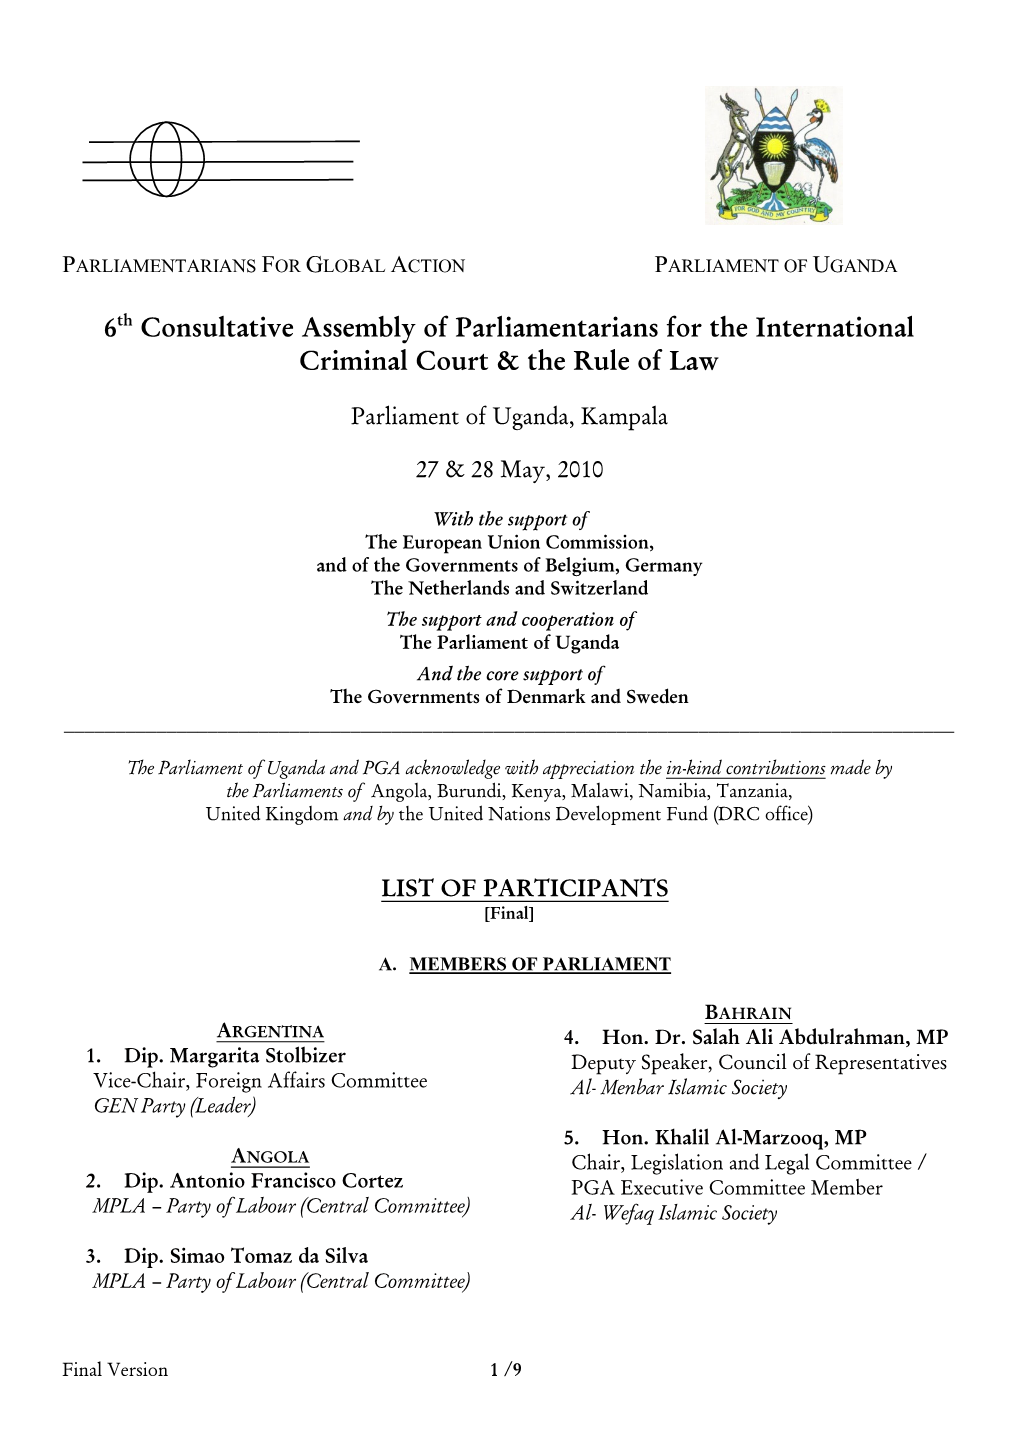 6Th Consultative Assembly of Parliamentarians for the International Criminal Court & the Rule of Law